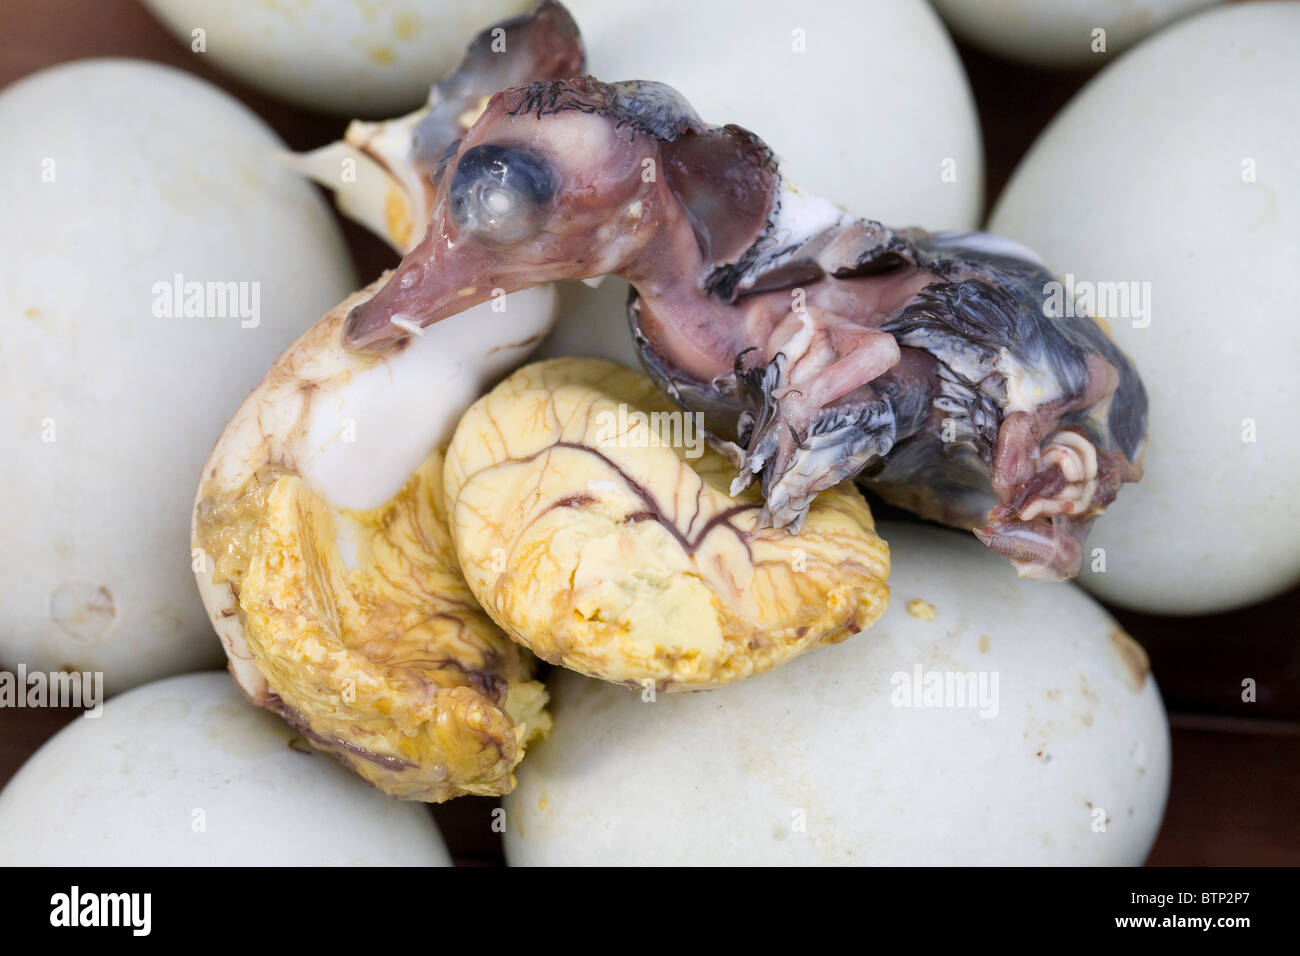 The exposed embryo from a balut, or boiled fertilized duck egg, pictured in Oriental Mindoro, Philippines. Stock Photo